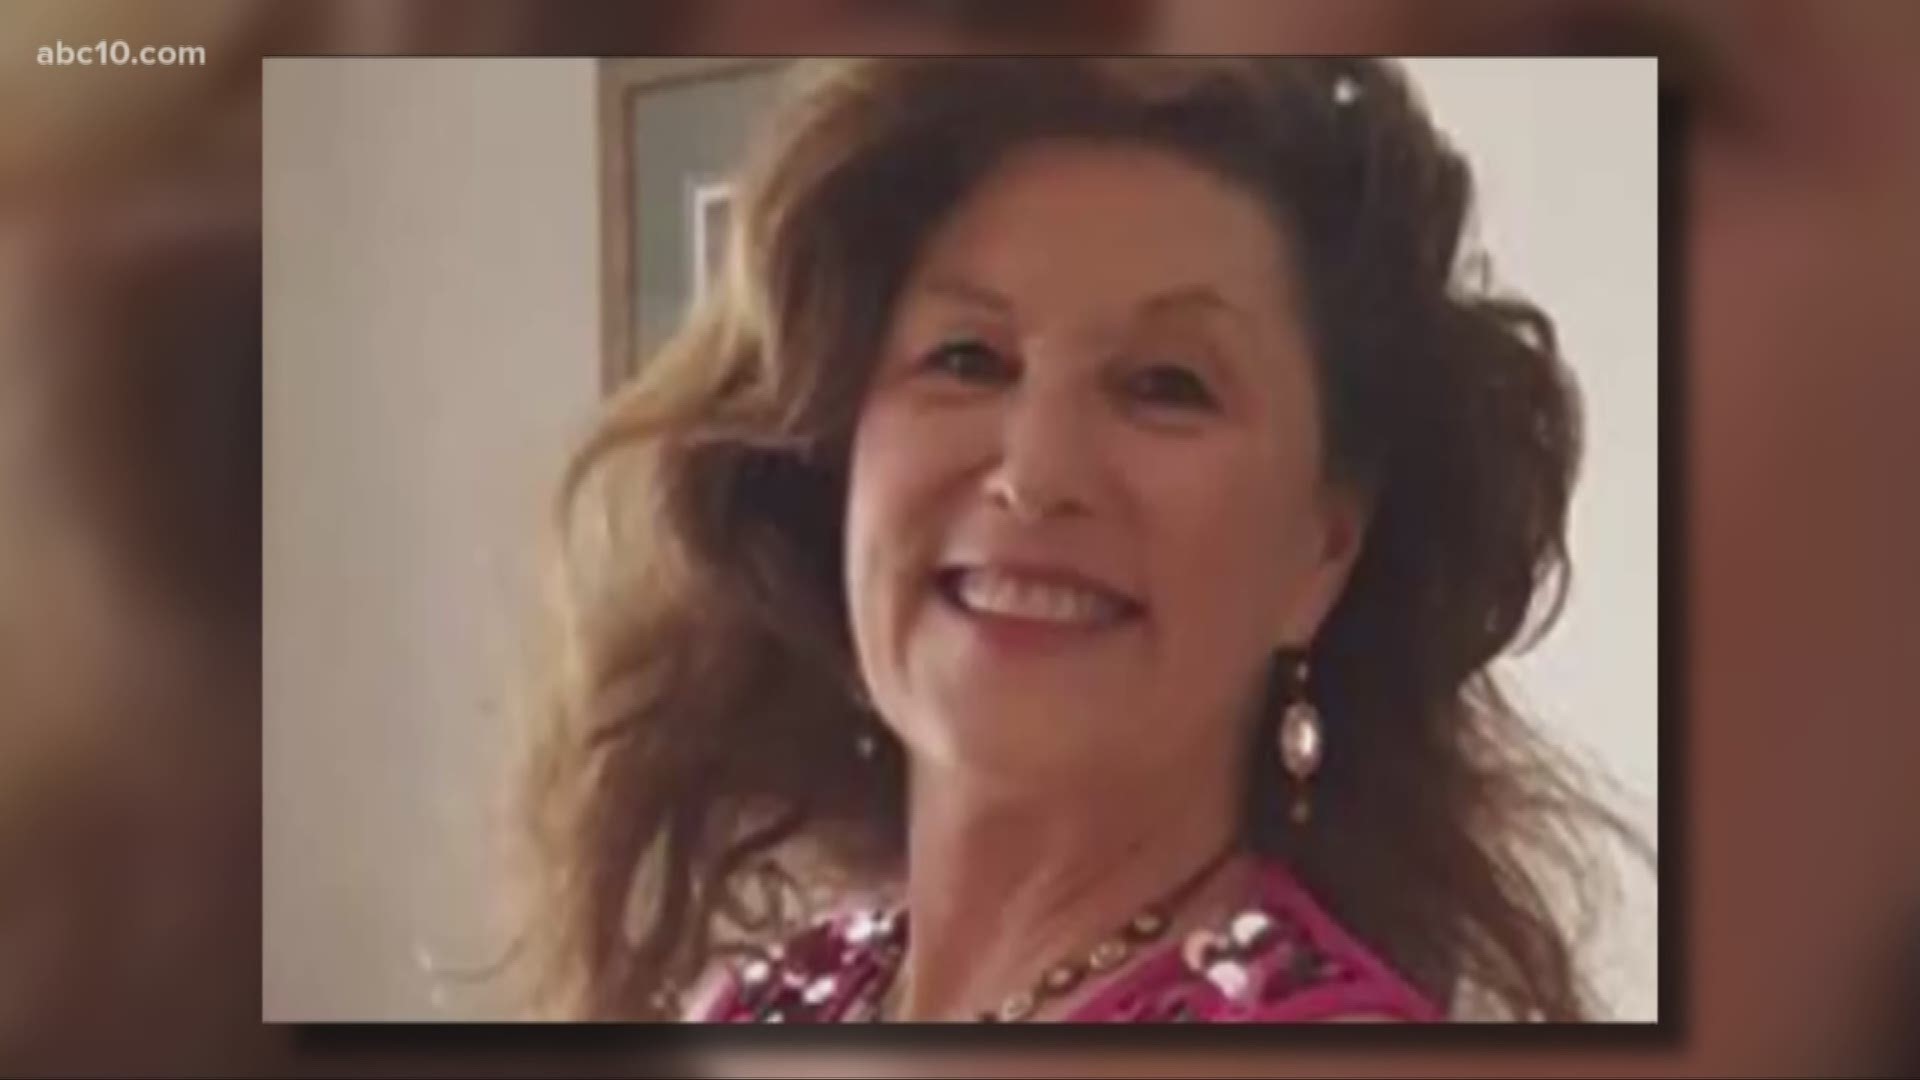 Lori Kaye was killed in Saturday’s attack at Chabad of Poway Synagogue. Now, she's being remembered as a friendly, loving, determined person and member of her community.